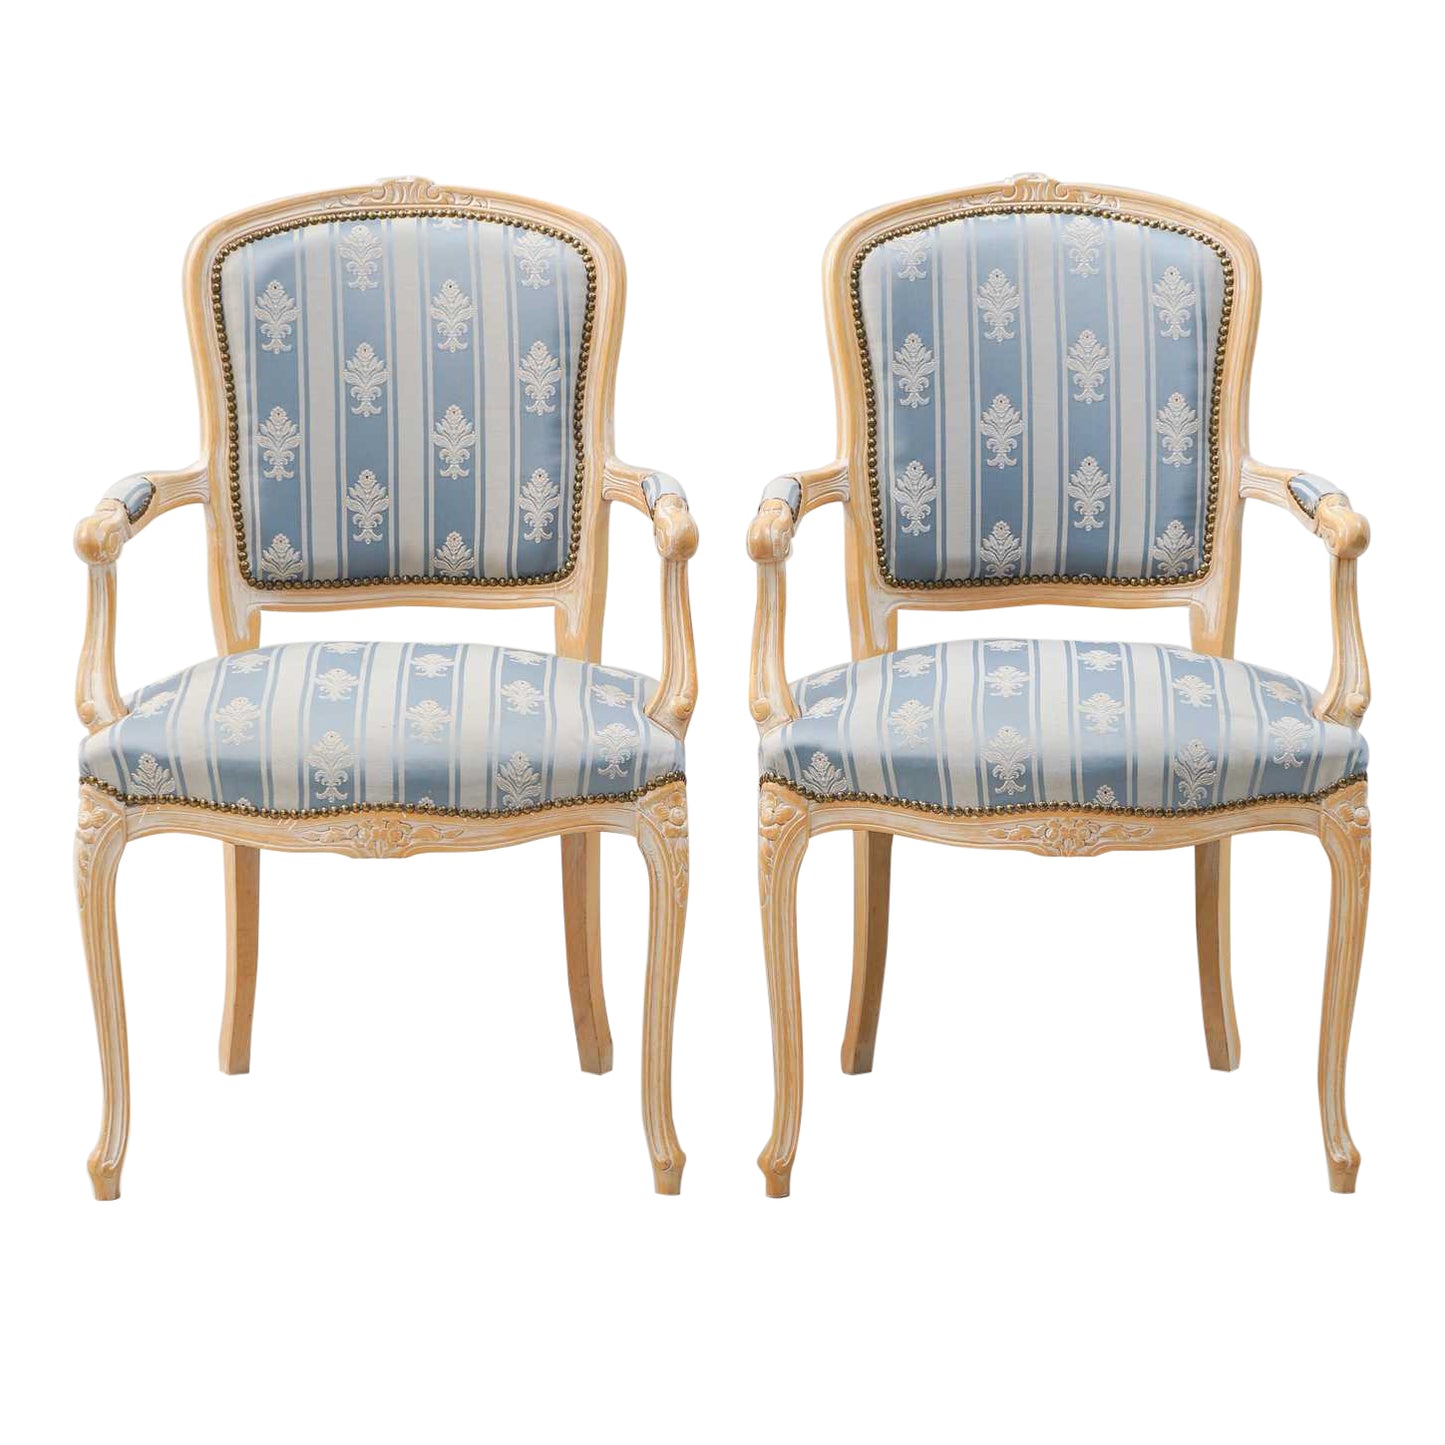 1950s Vintage Rococo Armchairs- A Pair